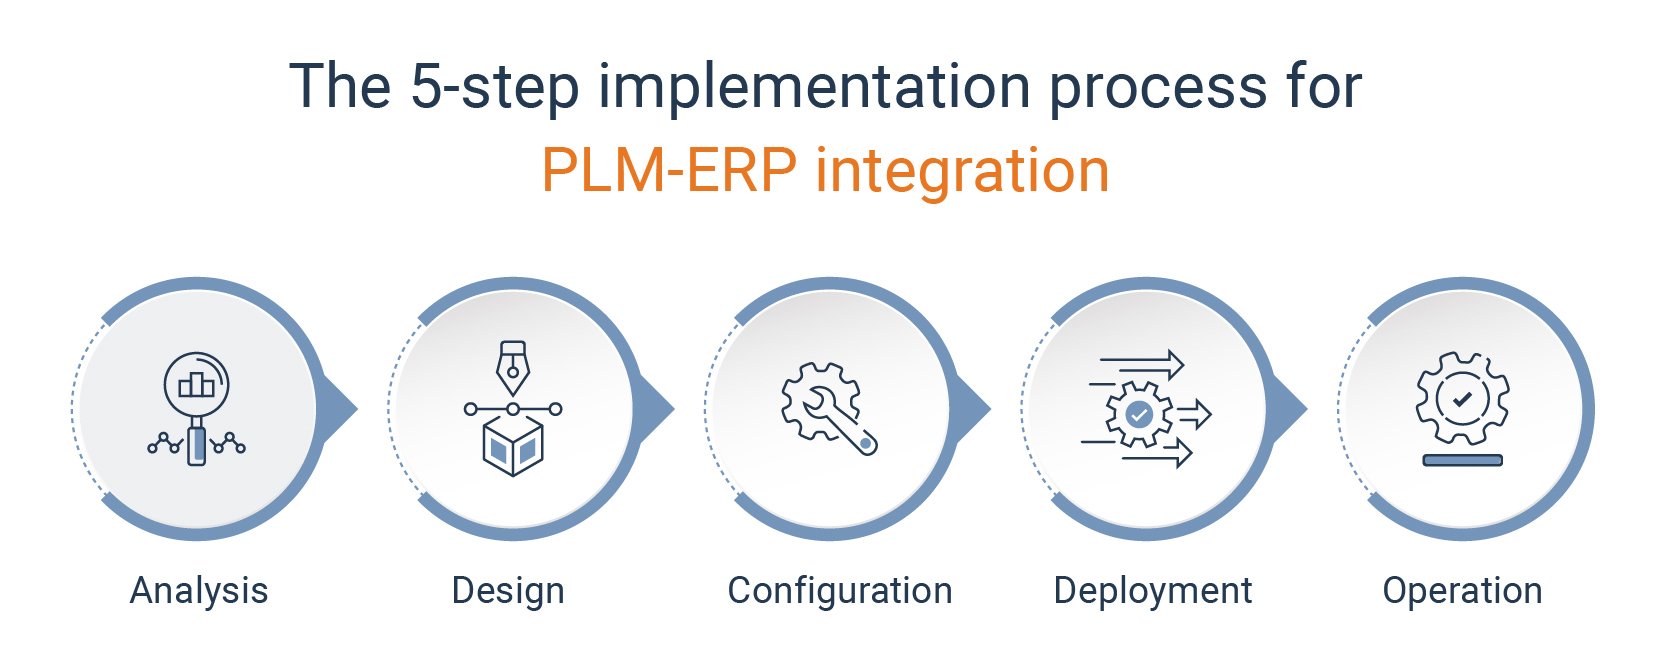 5 step implementation process for integrating PLM and ERP